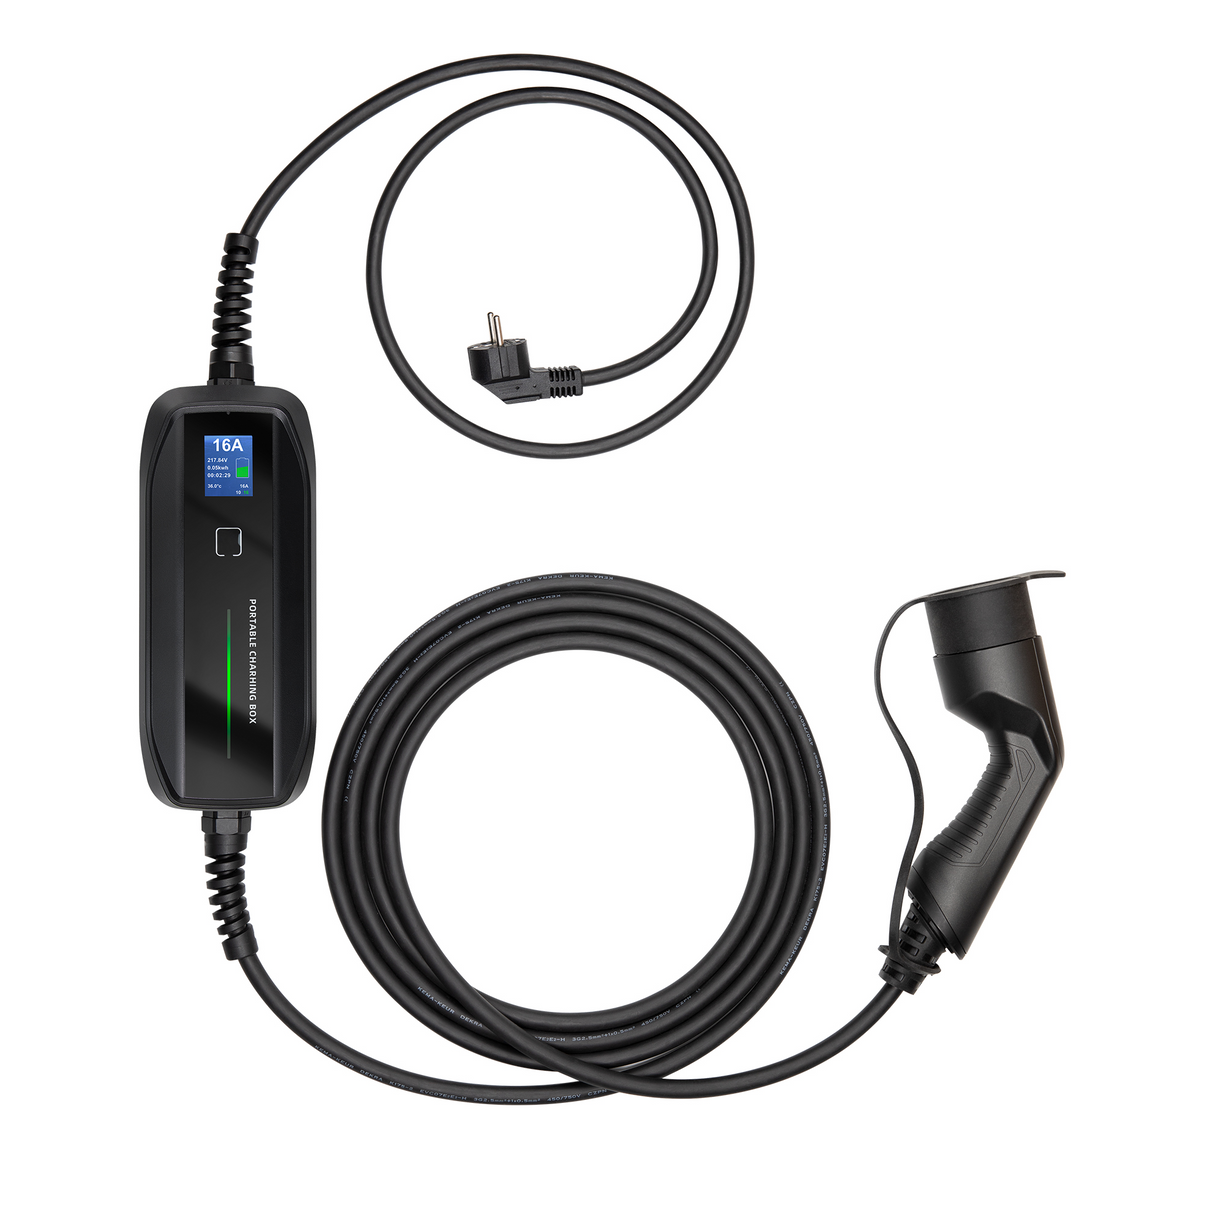 Mobile Charger Renault Twingo - Besen with LCD - Type 2 to Schuko